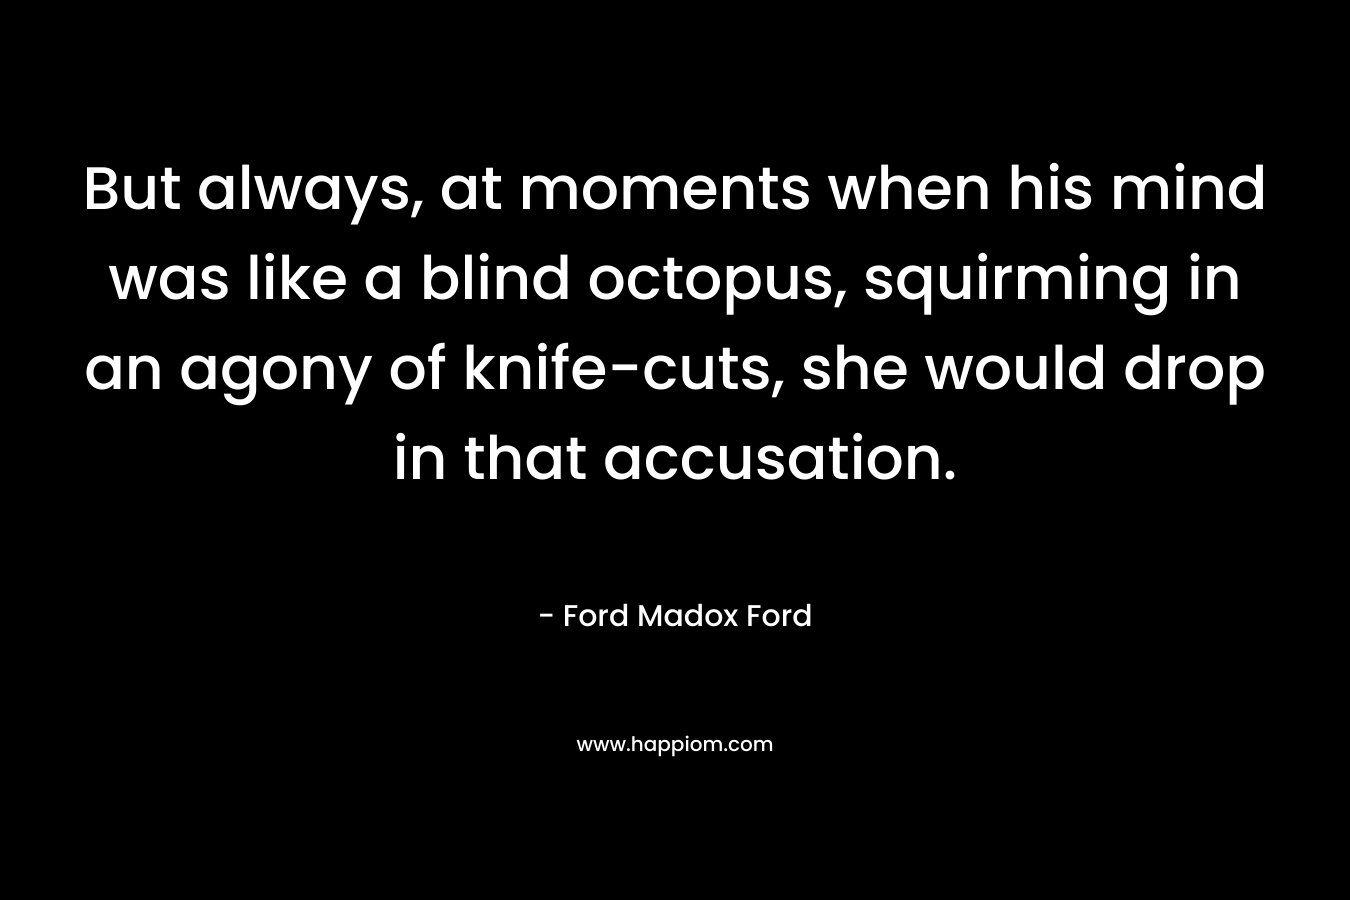 But always, at moments when his mind was like a blind octopus, squirming in an agony of knife-cuts, she would drop in that accusation.